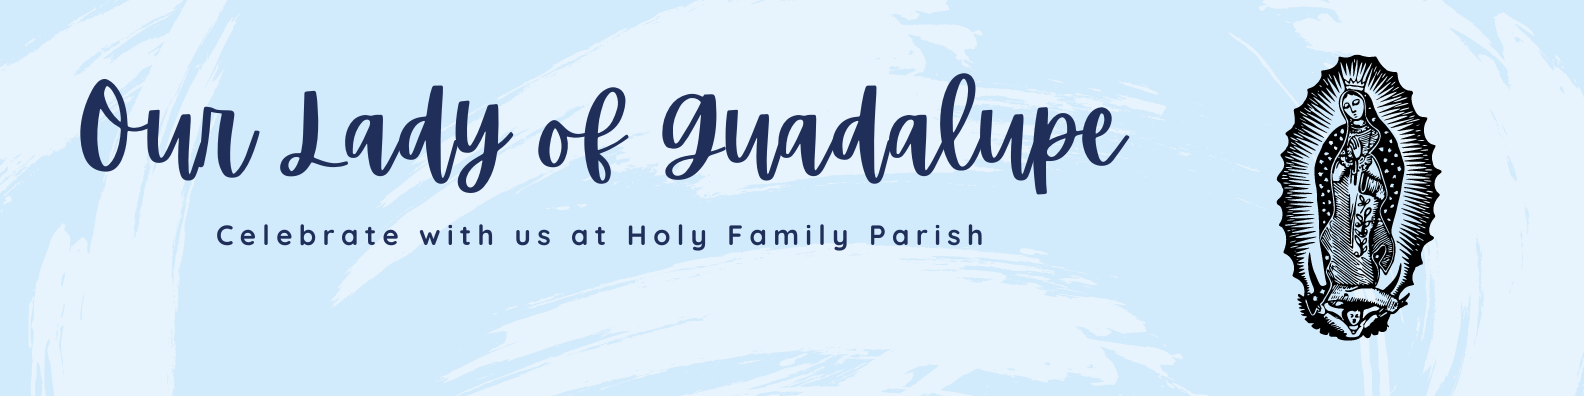 Our Lady of Guadalupe Mass (English/Spanish) @ Sacred Heart Church